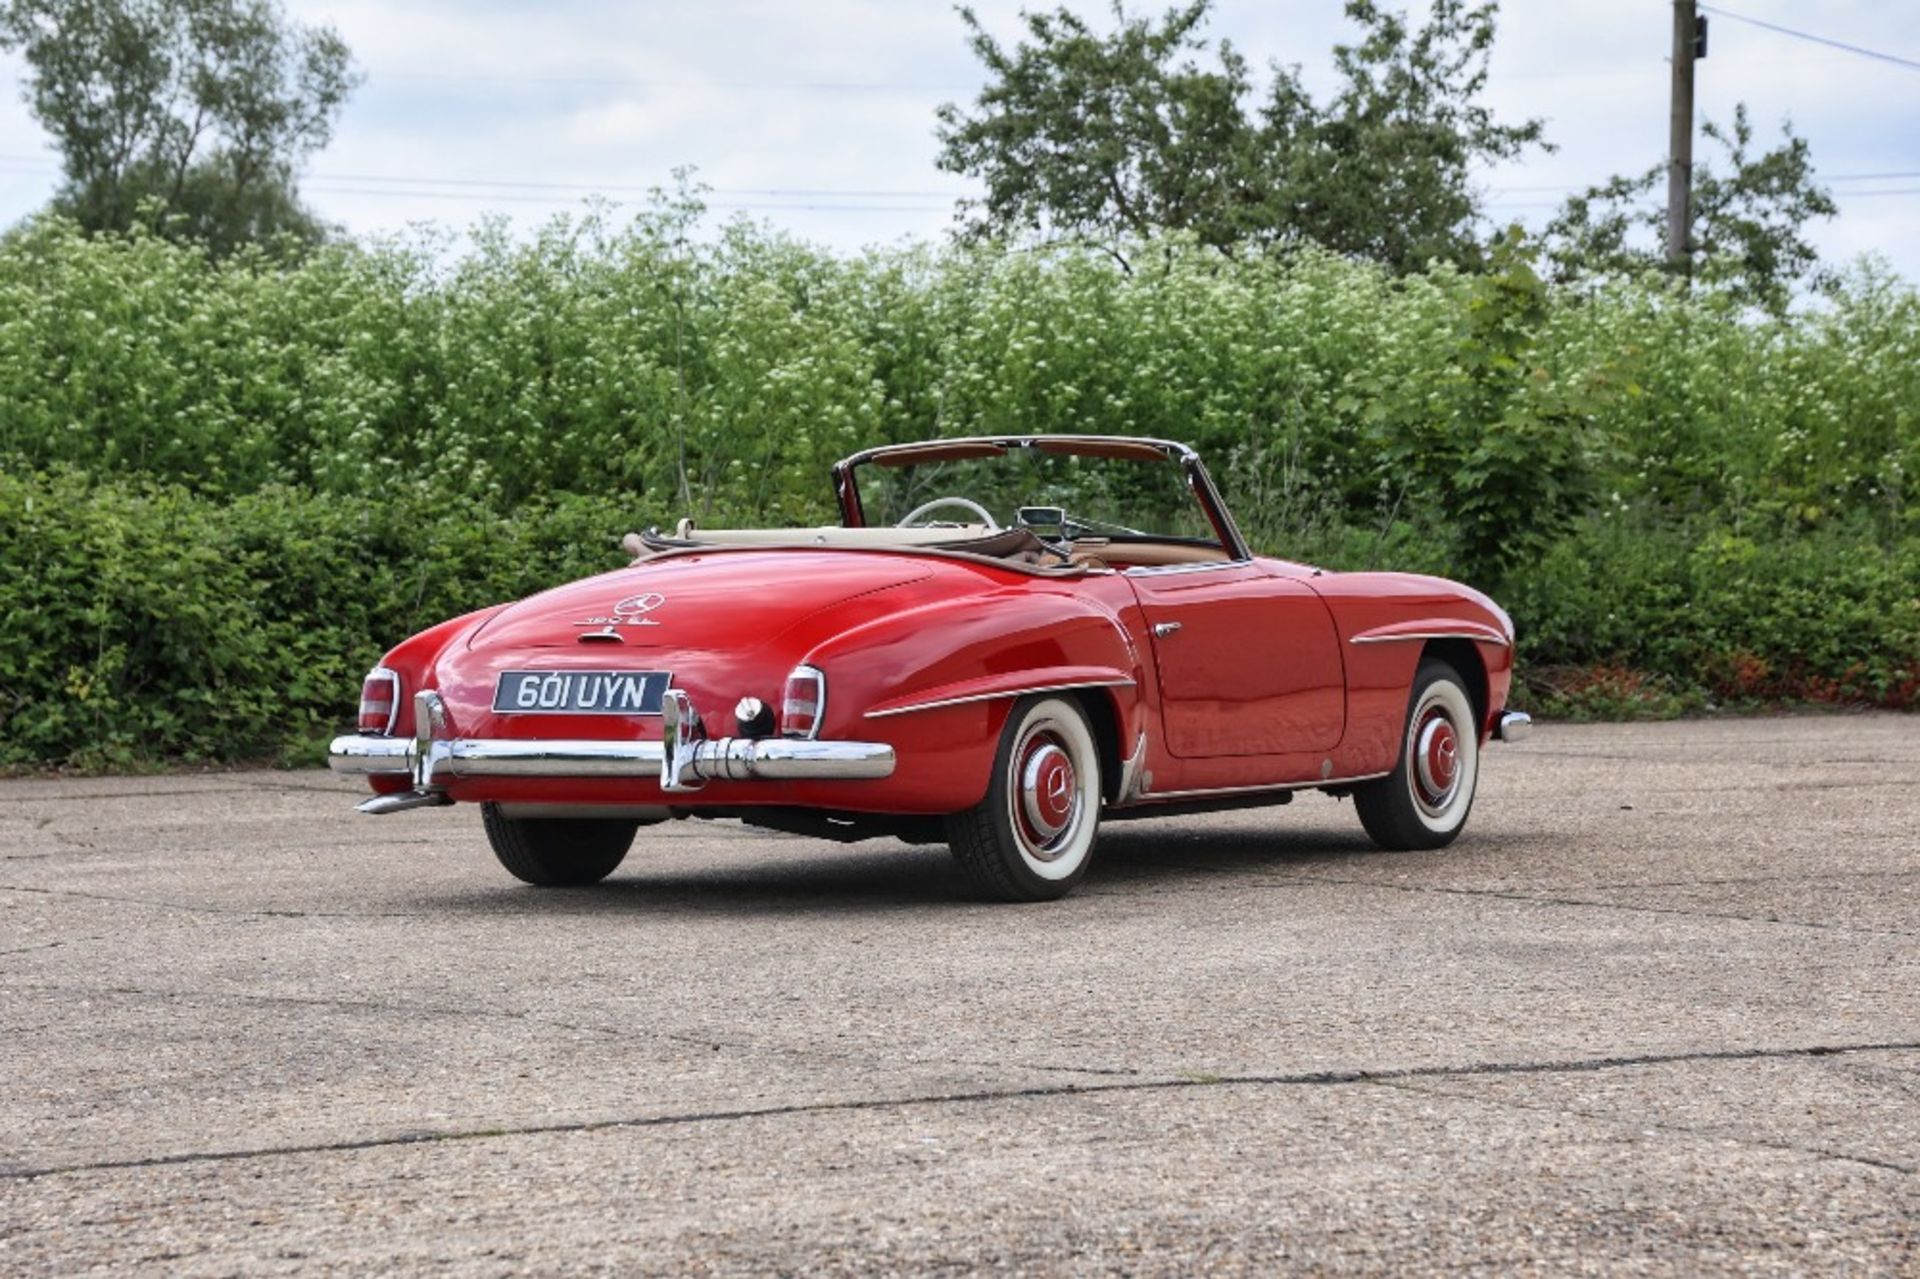 1958 MERCEDES-BENZ 190SL Registration Number: 601 UYN Chassis Number: 121.040.8500635 Recorded - Image 5 of 23